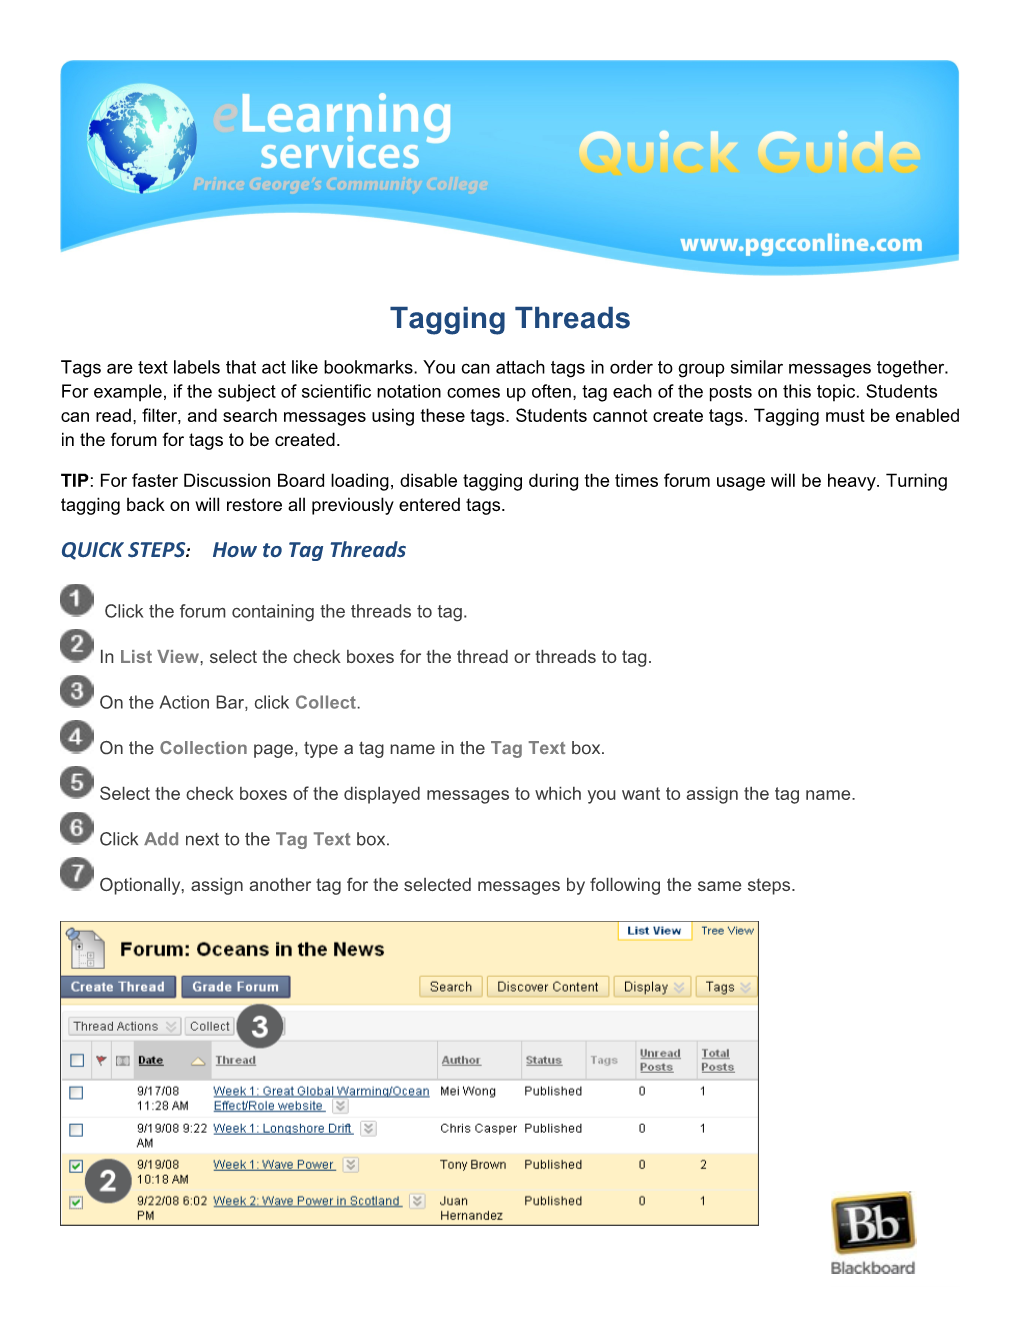 QUICK STEPS: How to Tag Threads